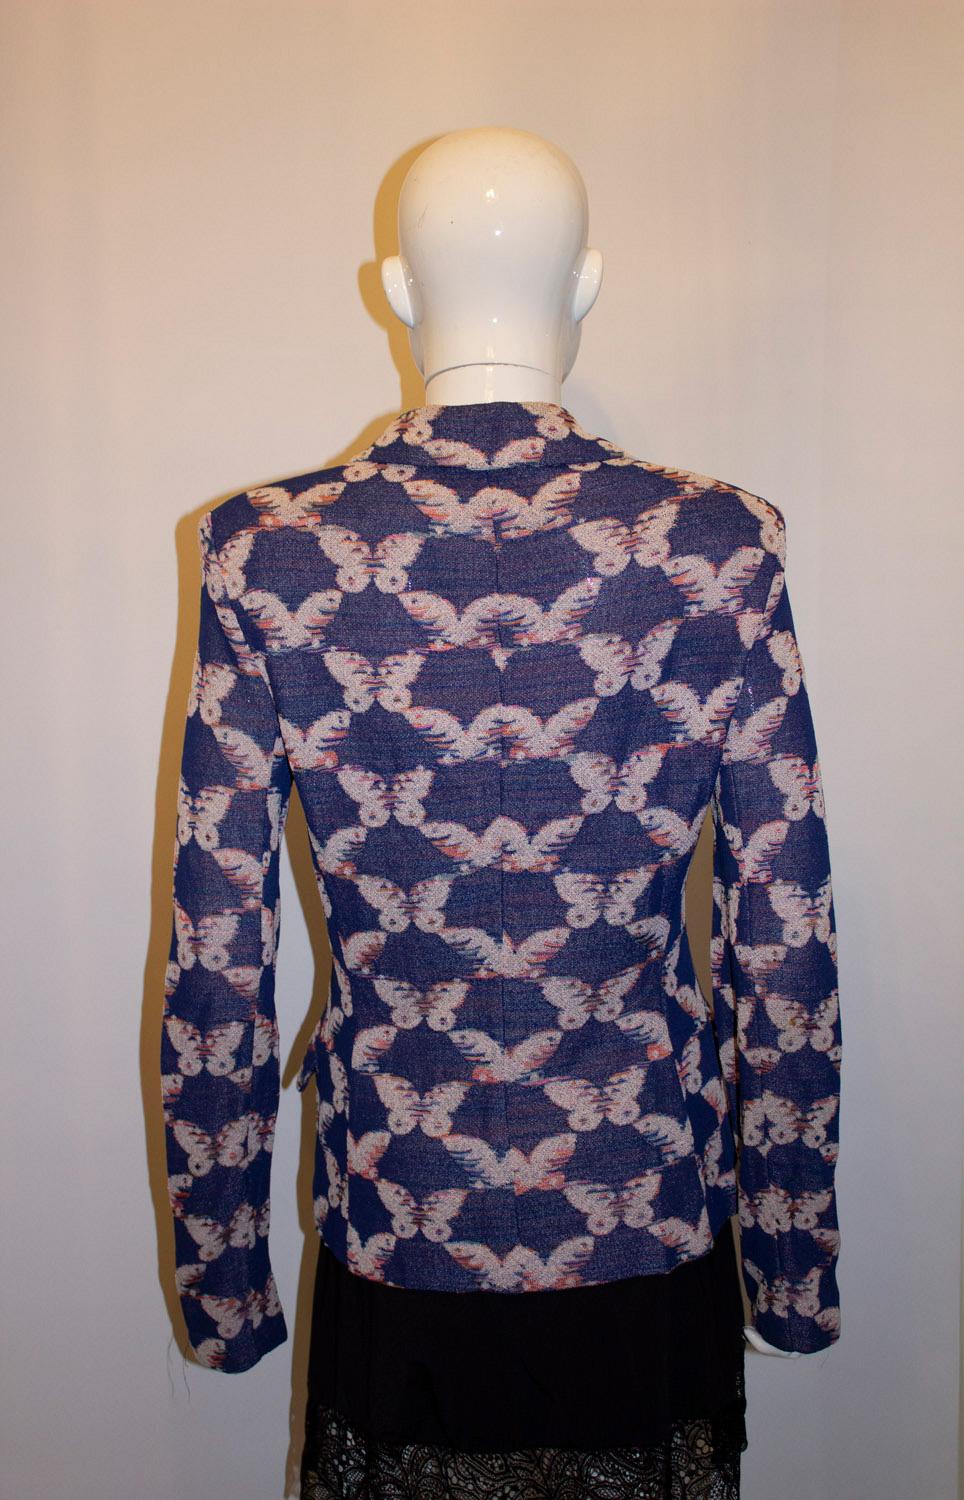 A pretty vintage jacket by Missoni , mainline . The jacket has a blue background with an attractive butterfly print. It has a three button opening, small shoulder pads and a pocket on either side. It is unlined. Size Italian 42, Bust 37'', length